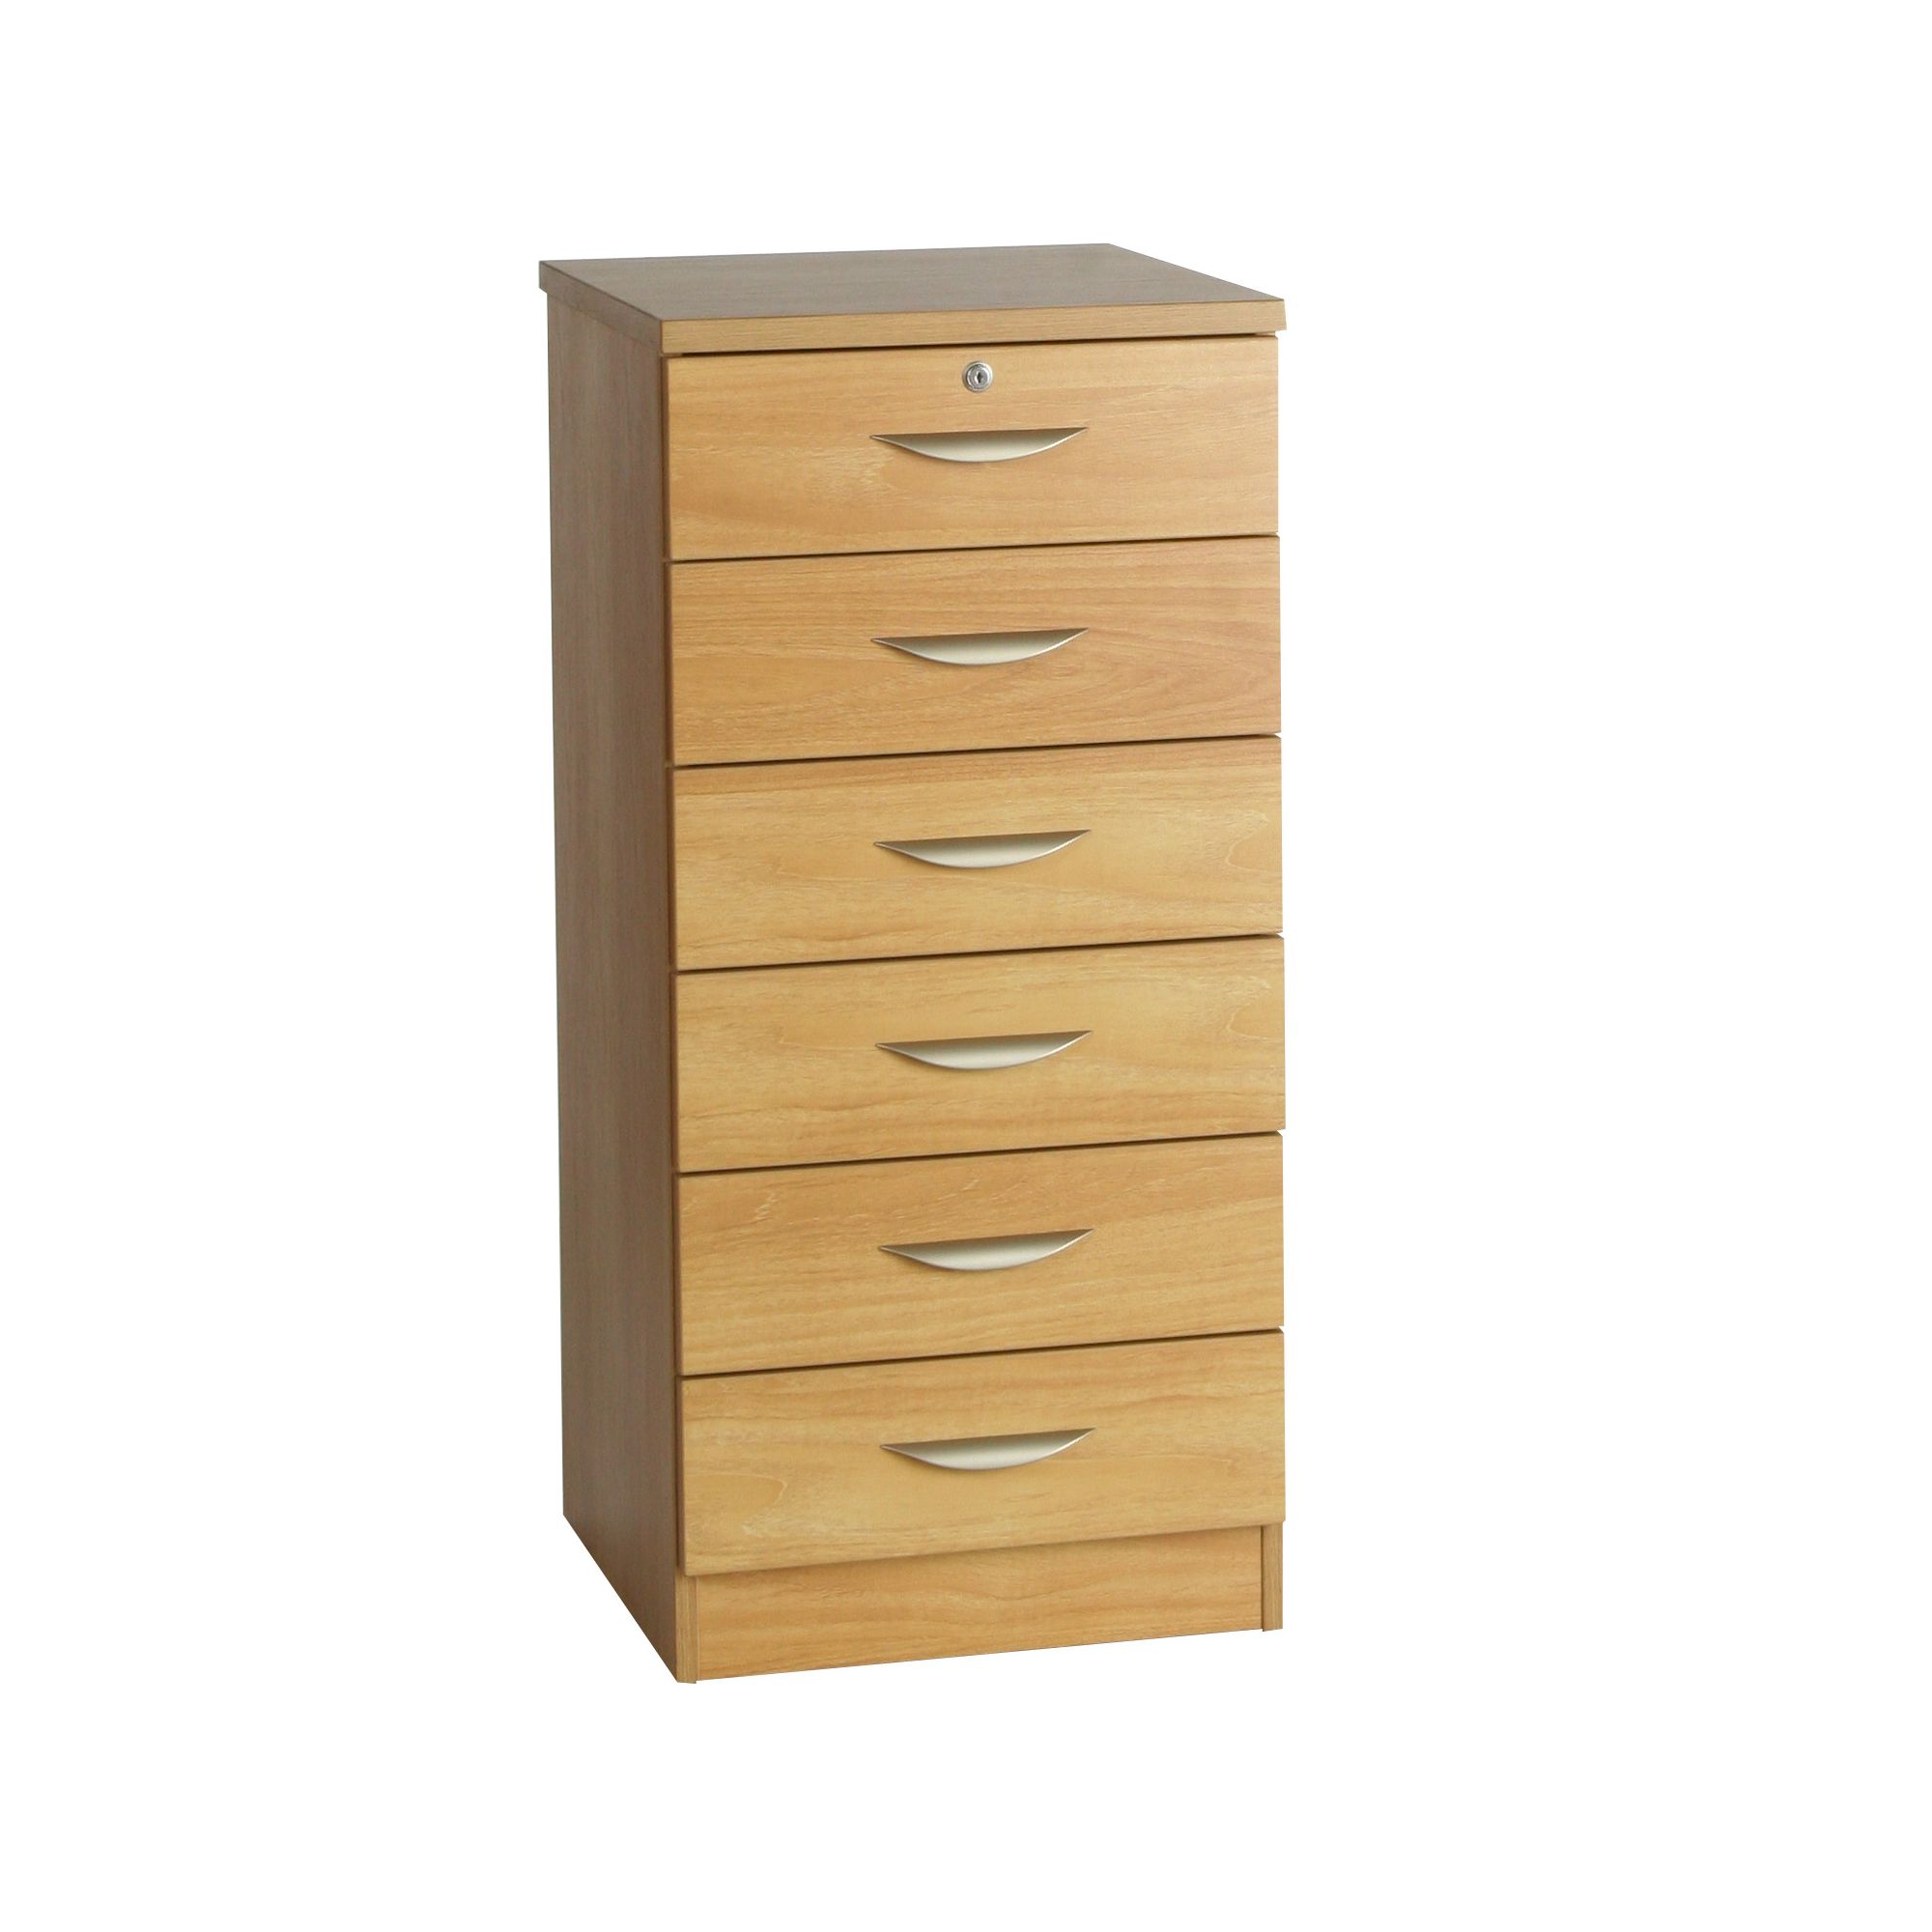 R White Cabinets Six Drawer Wooden Home Office Unit - Teak at Tesco Direct